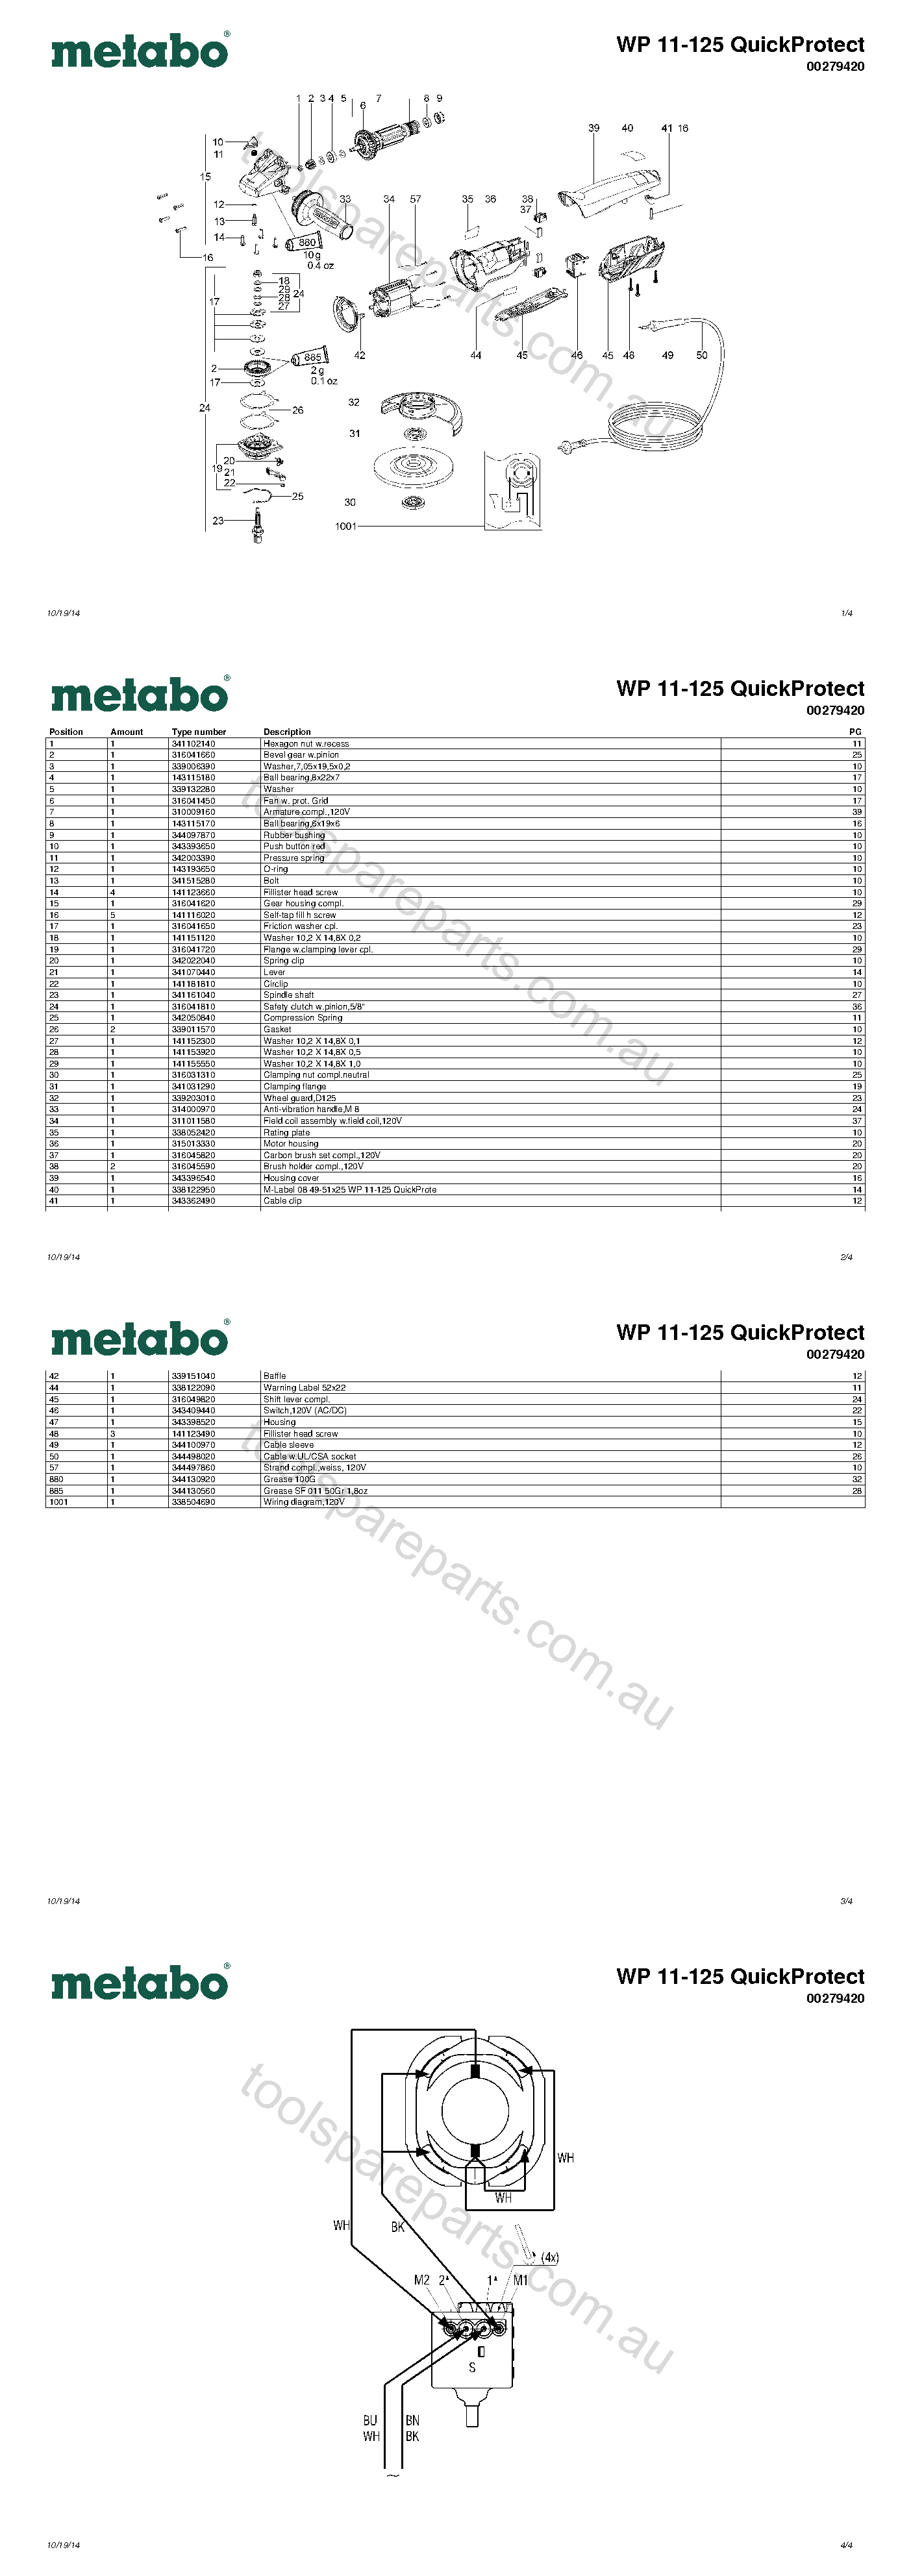 Metabo WP 11-125 QuickProtect 00279420  Diagram 1